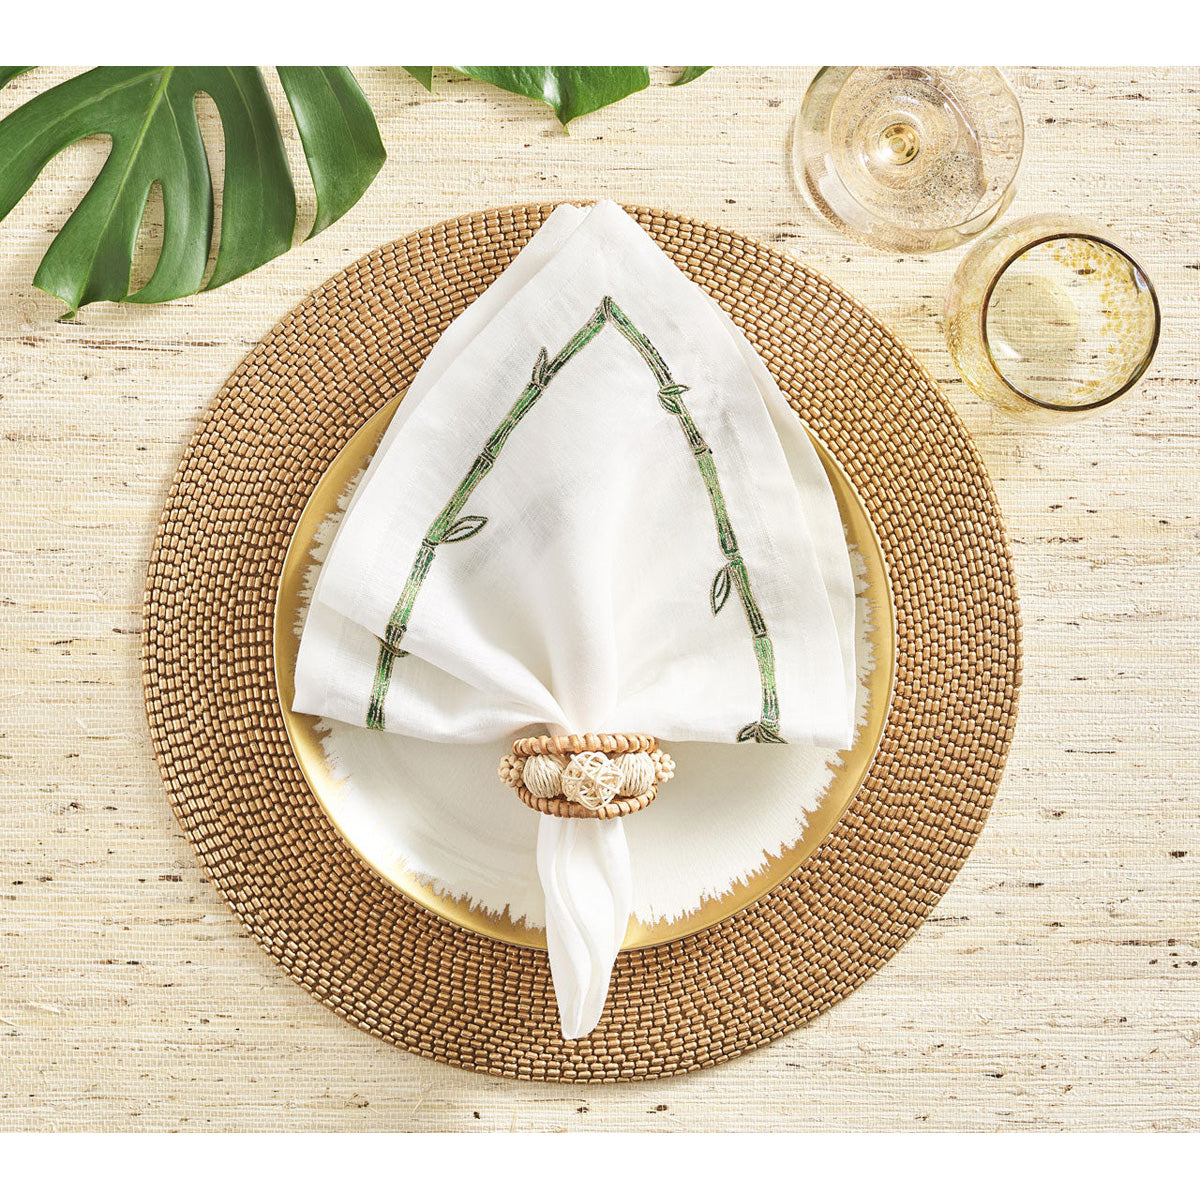 Playa Napkin Ring in Natural - Set of 4 by Kim Seybert Additional Image-1 Additional Image-1